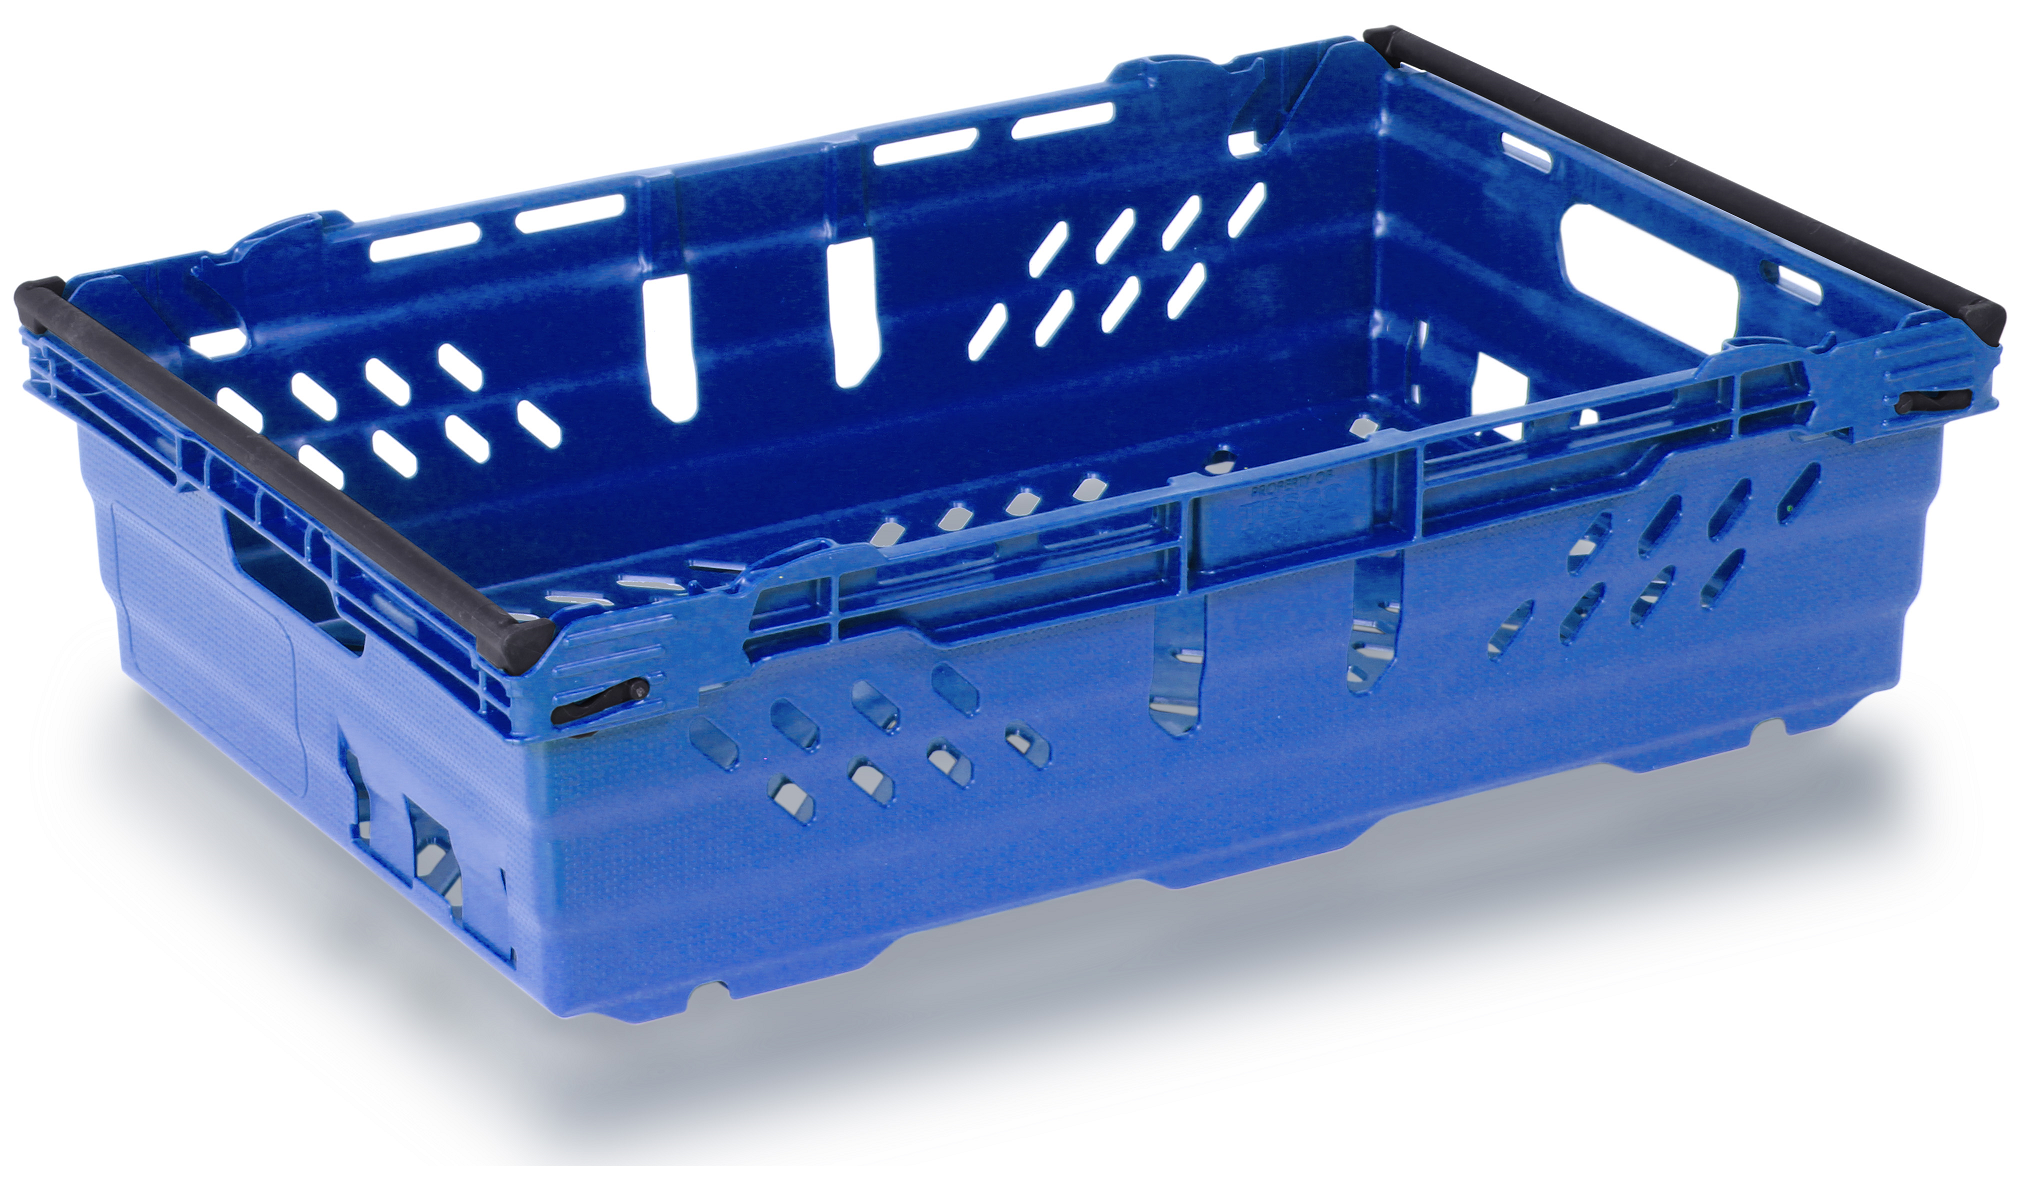 Bulk Offers Bale Arm Crate 600x400x350 Blue Hybrid Packs of 4 - Solid Base For Agricultural Industry